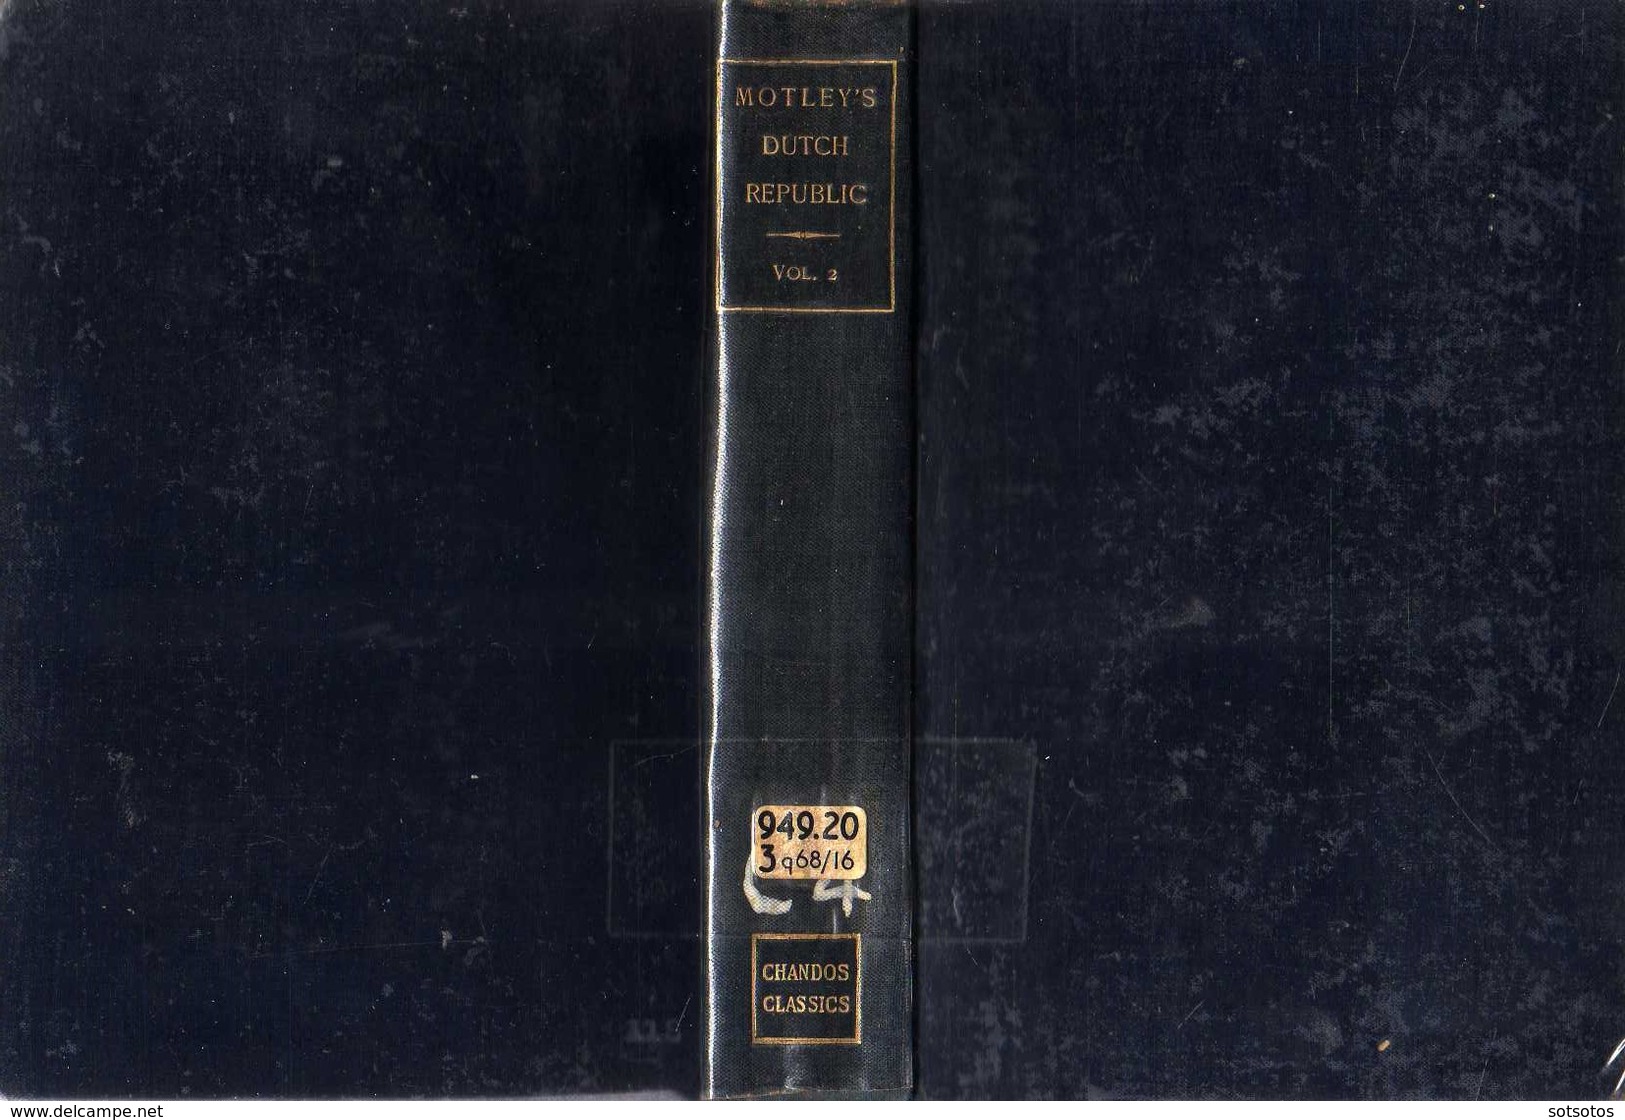 The RISE Of The DUTCH REPUBLIC Vol. II: J. LOTHROP MOTLEY And A.J. MANSFIELD, Ed. Fr. WARNE (1902?), 572 Pages, Good Con - Antiquità